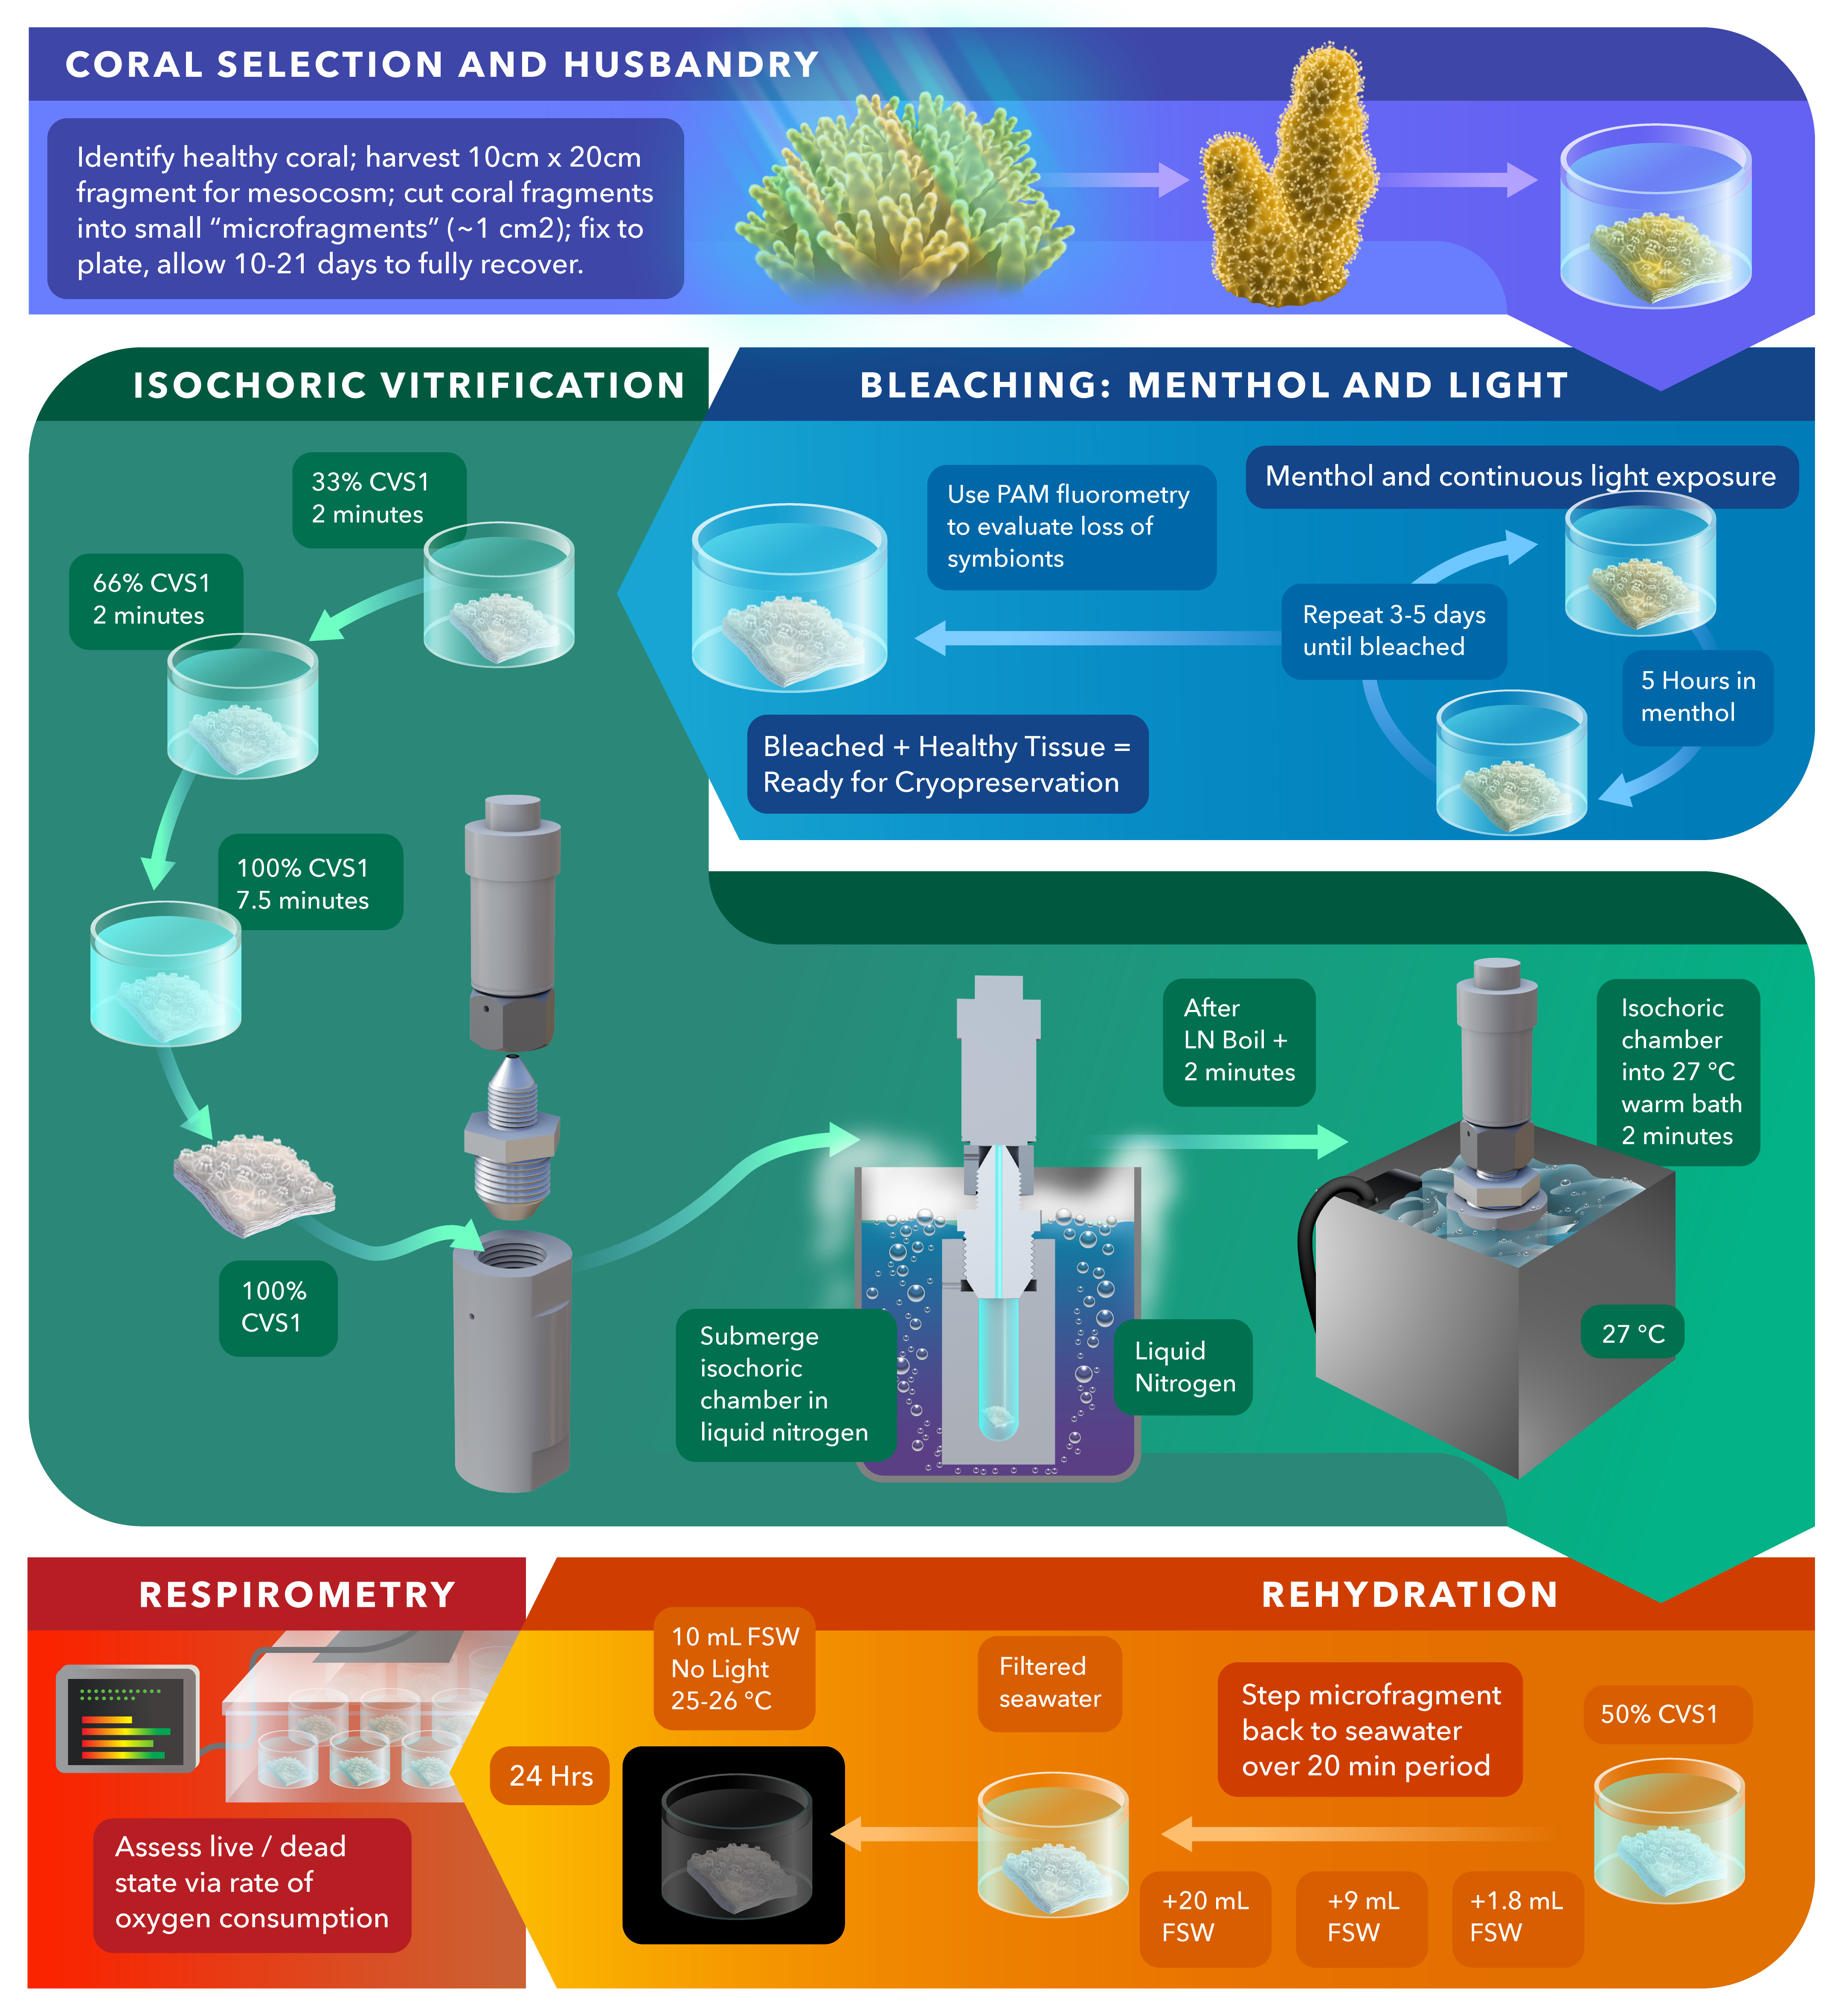 Infographic detailing isochoric vitrification process for corals.